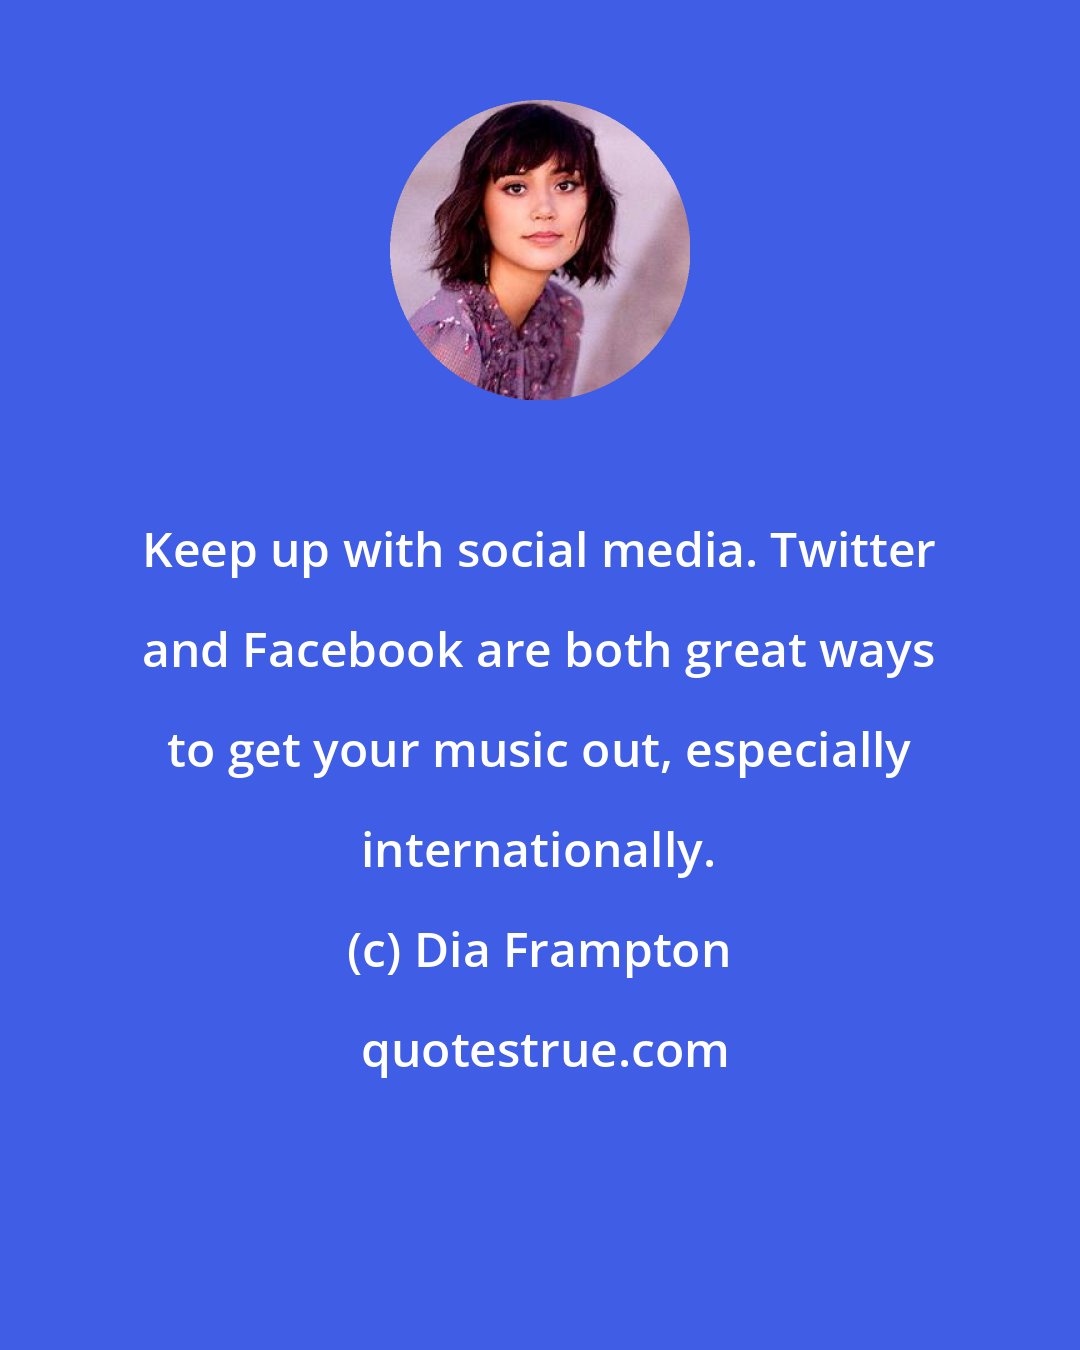 Dia Frampton: Keep up with social media. Twitter and Facebook are both great ways to get your music out, especially internationally.